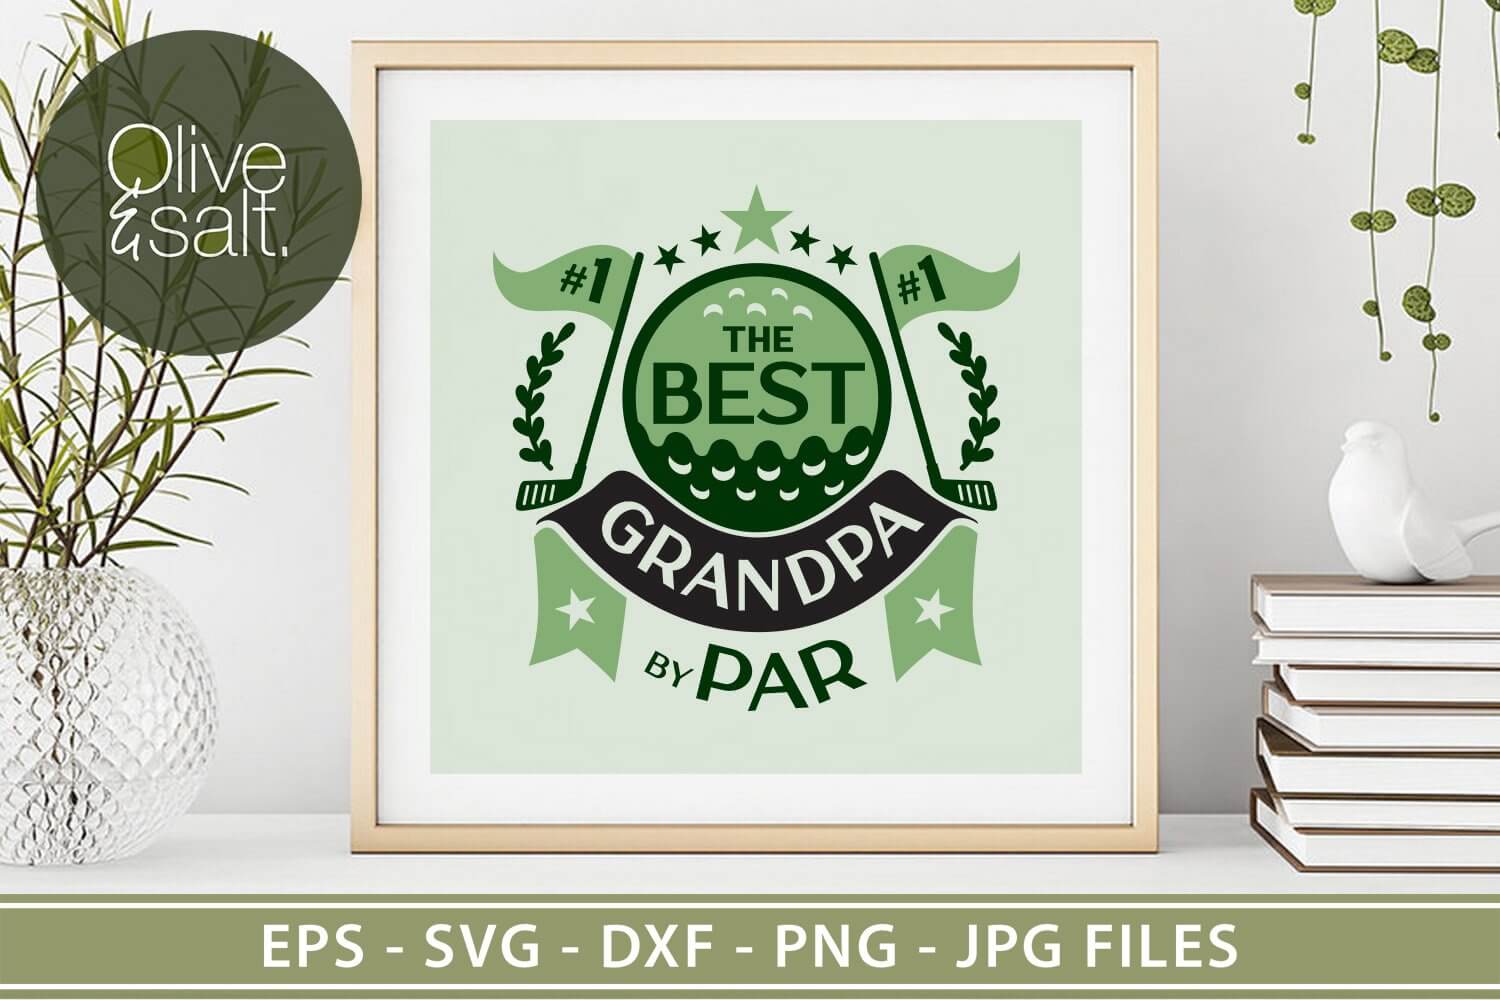 Large Logo on a white background in a wooden frame "The Best Grandpa by Par".